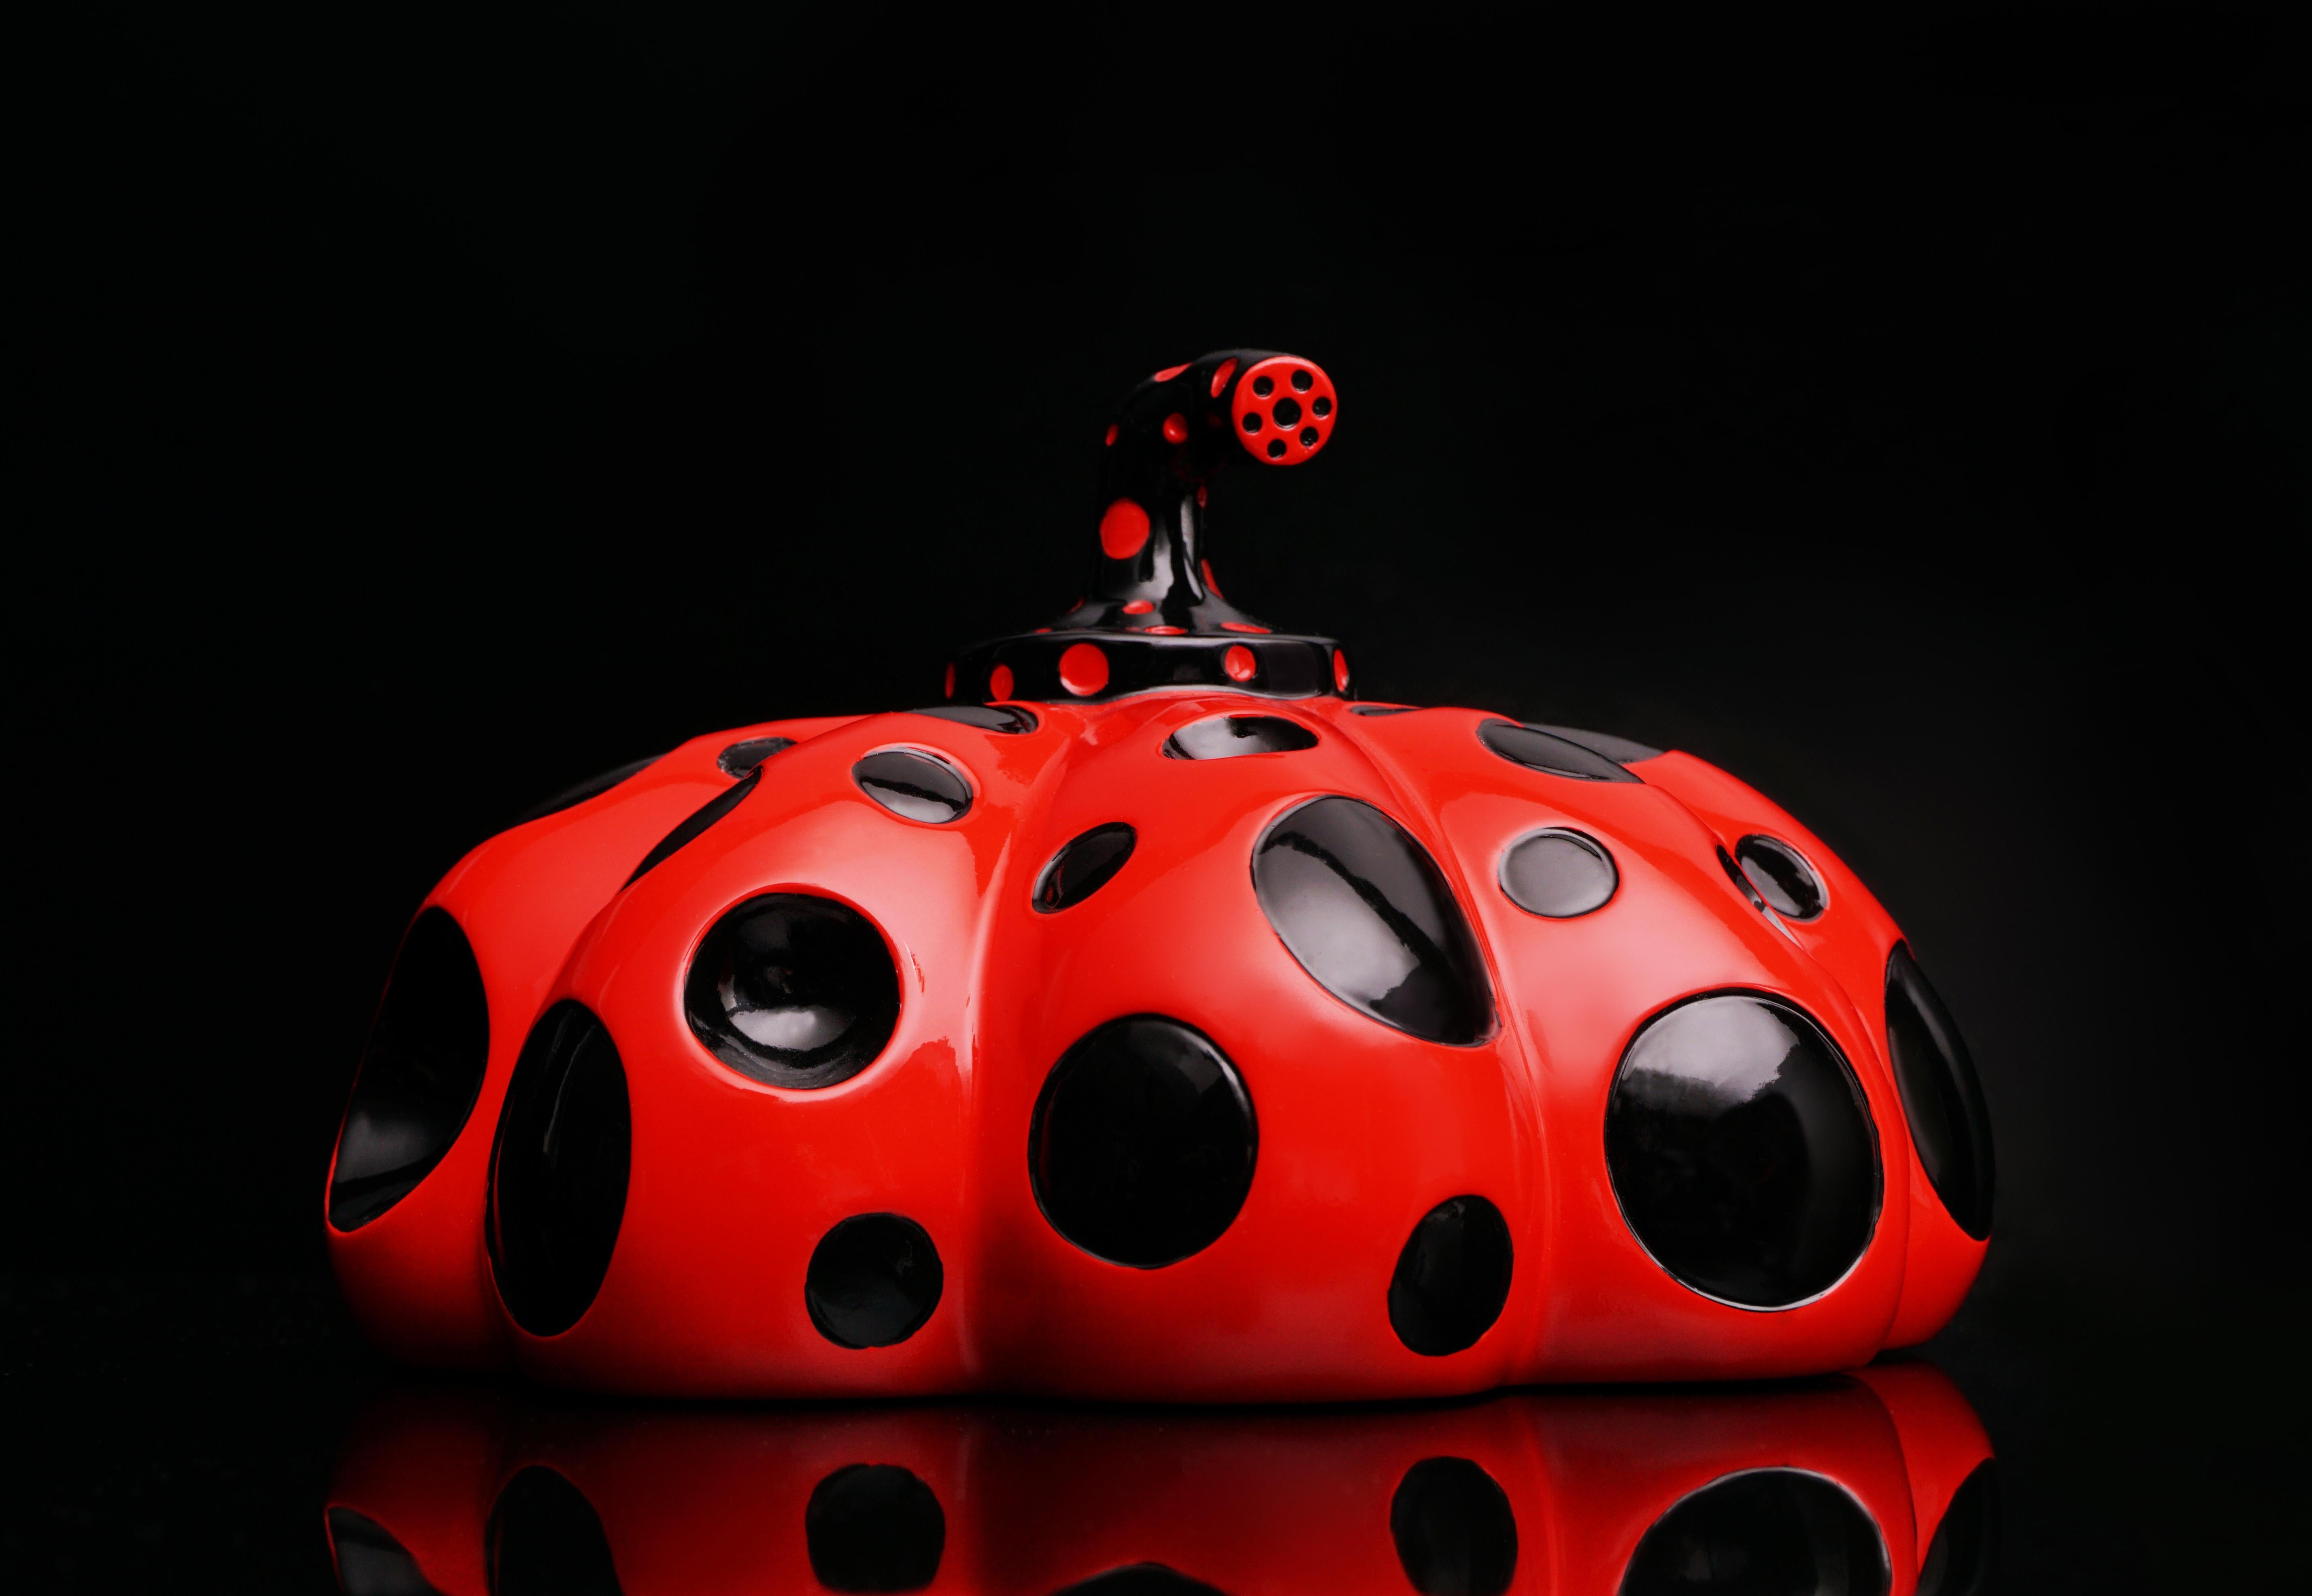 The ’Naoshima’ Red Pumpkin is a painted lacquer resin abstract sculpture and art object by legendary contemporary Artist, Yayoi Kusama. Published by Benesse Holdings, Inc., Naoshima, Japan. Created in 2019, the polka-dotted piece is a quintessential